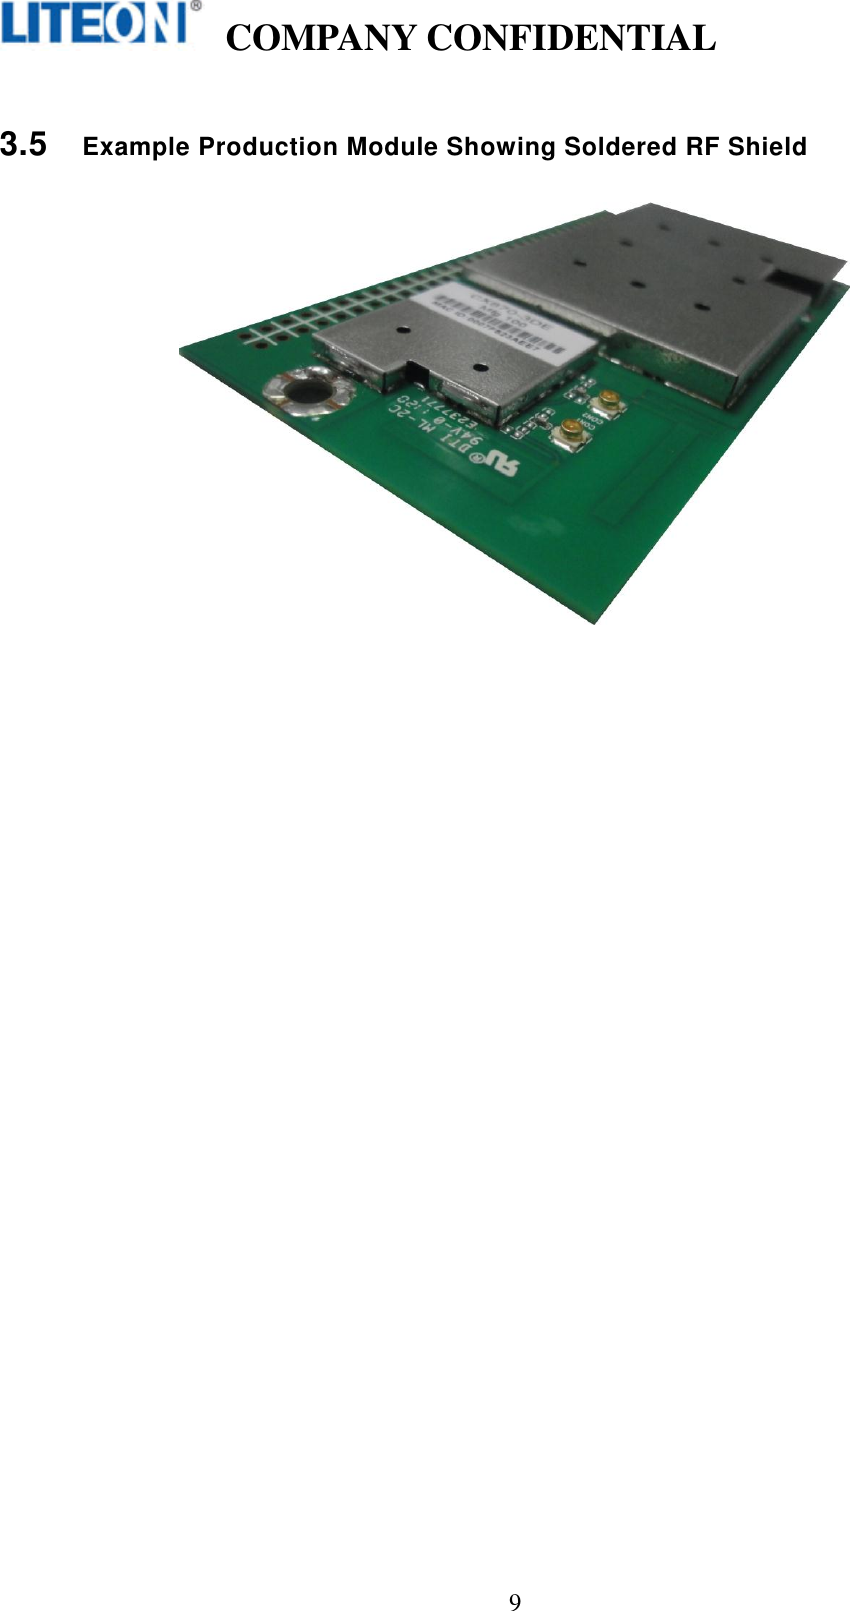   COMPANY CONFIDENTIAL    9  3.5 Example Production Module Showing Soldered RF Shield    